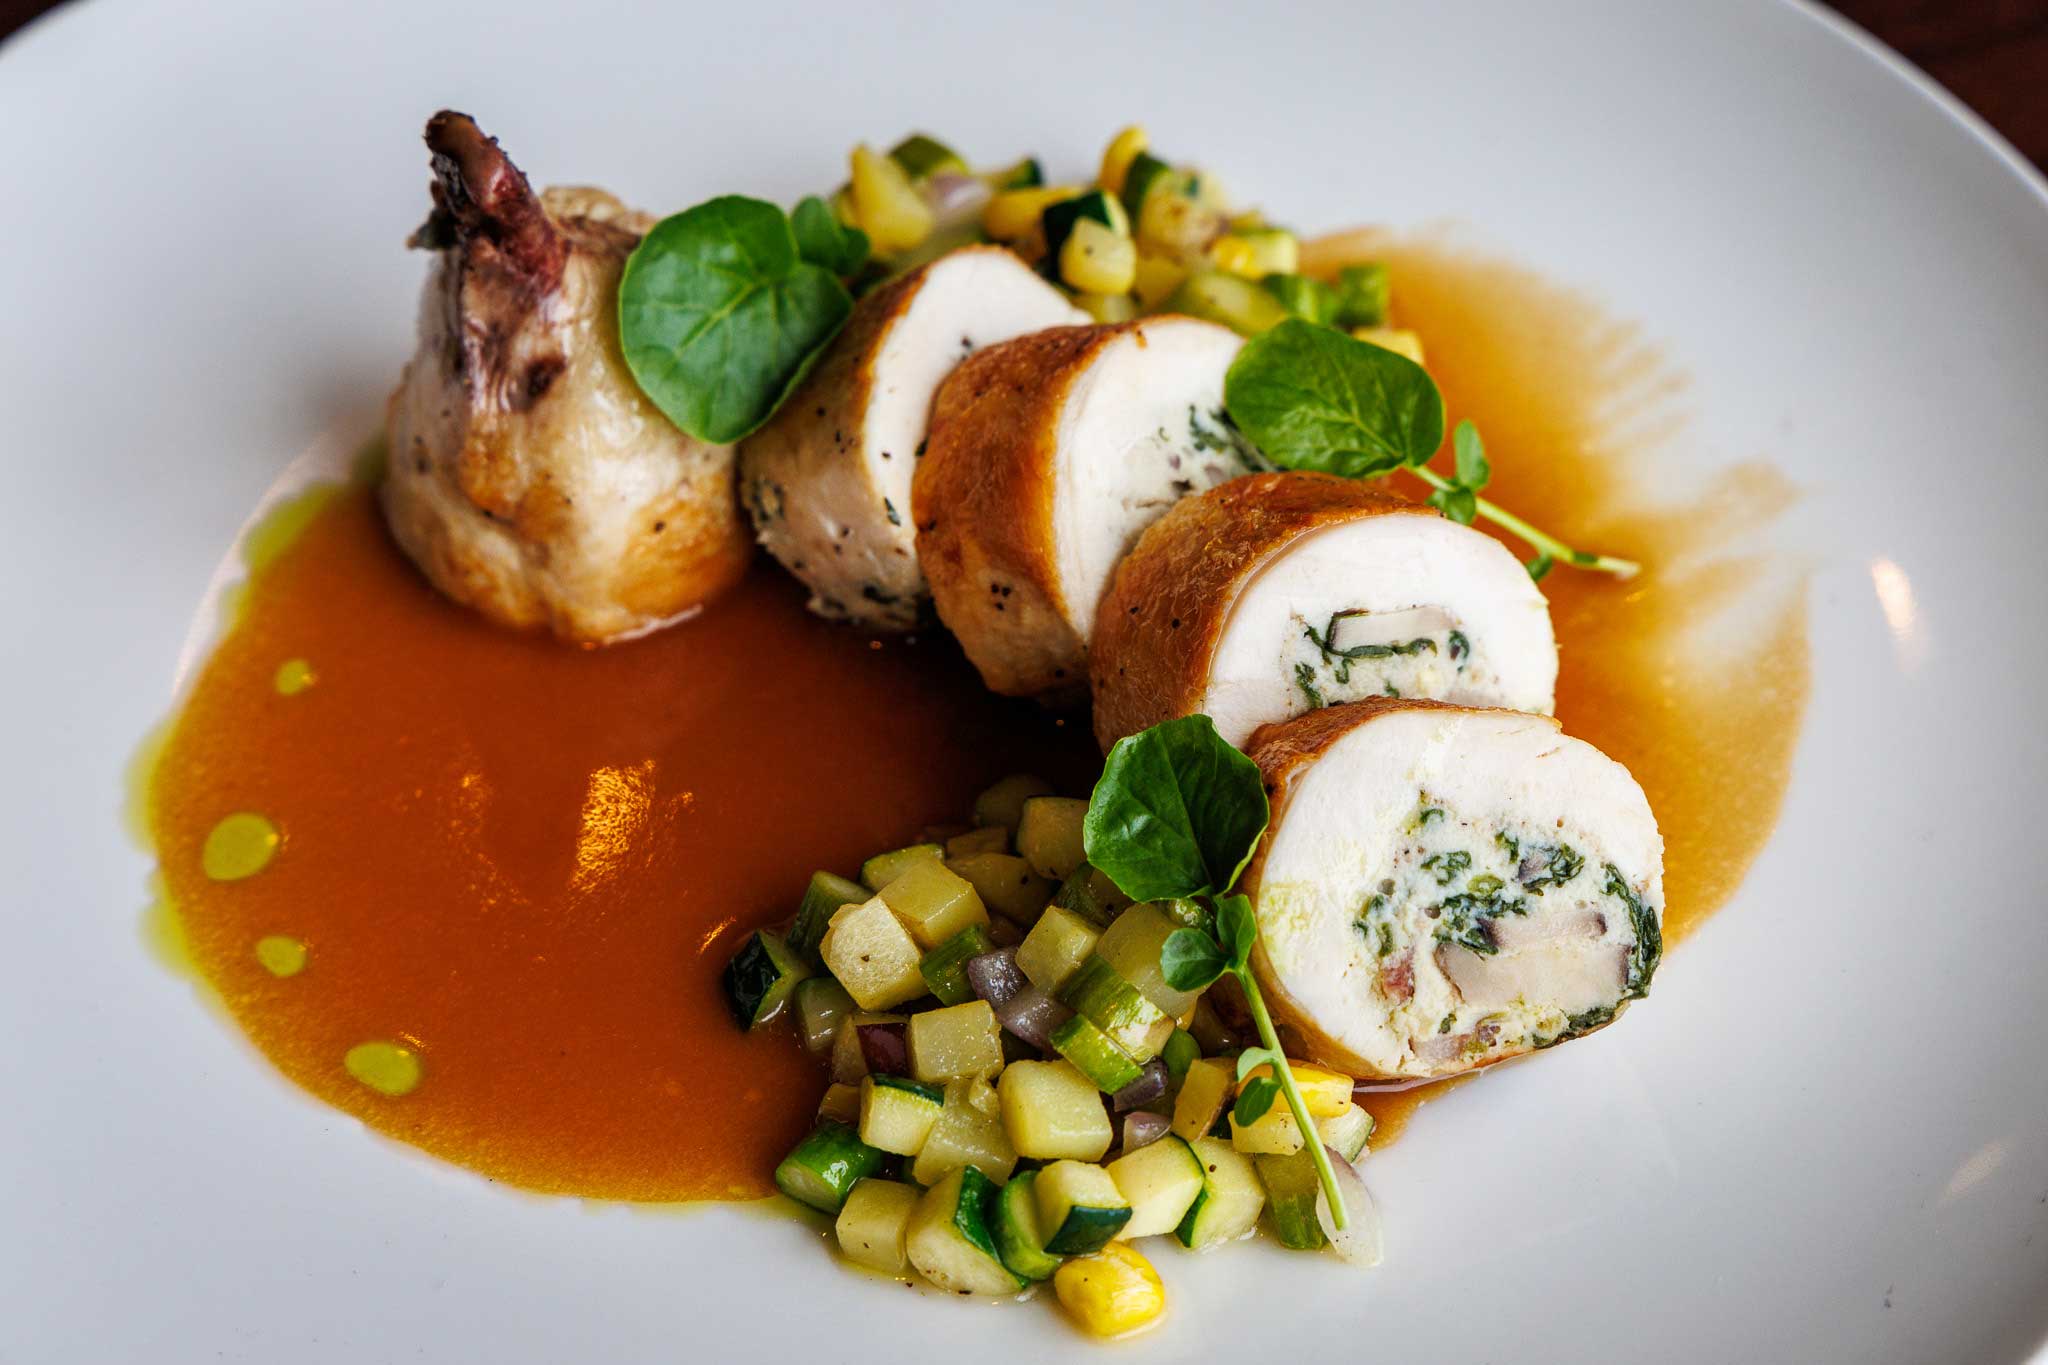 Chicken ballotine stuffed with mushroom mousseline, served with succotash and sauce supreme